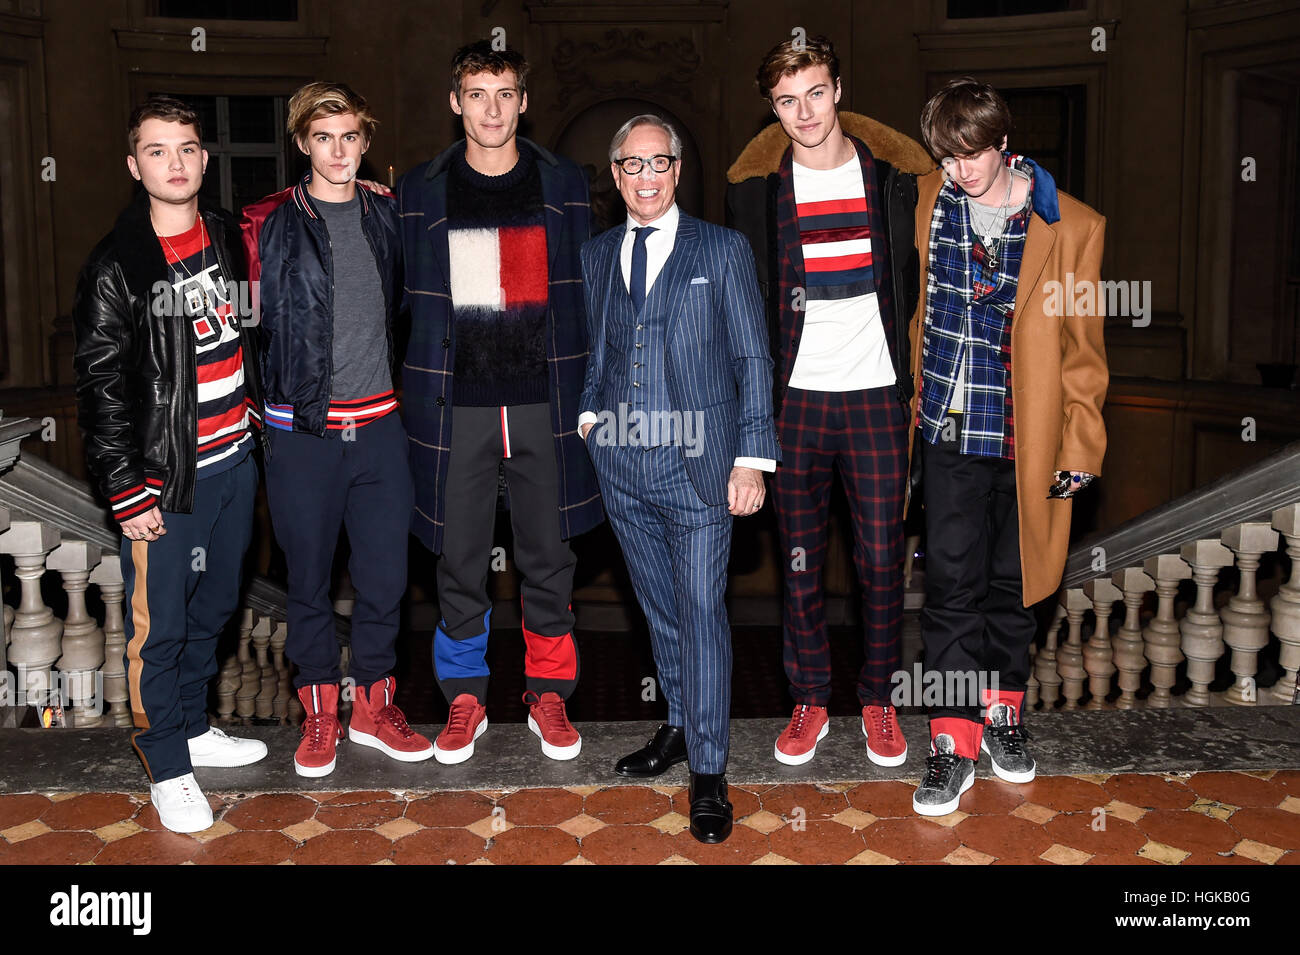 Firenze, Italy. 10th January, 2017. Tommy Hilfiger and the Hilfiger boys  during the Hilfiger presentation of Fall 2017 edition collection at Pitti  Immagine Uomo 91 in Firenze, Italy. Credit: Gaetano Piazzolla/Pacific  Press/Alamy